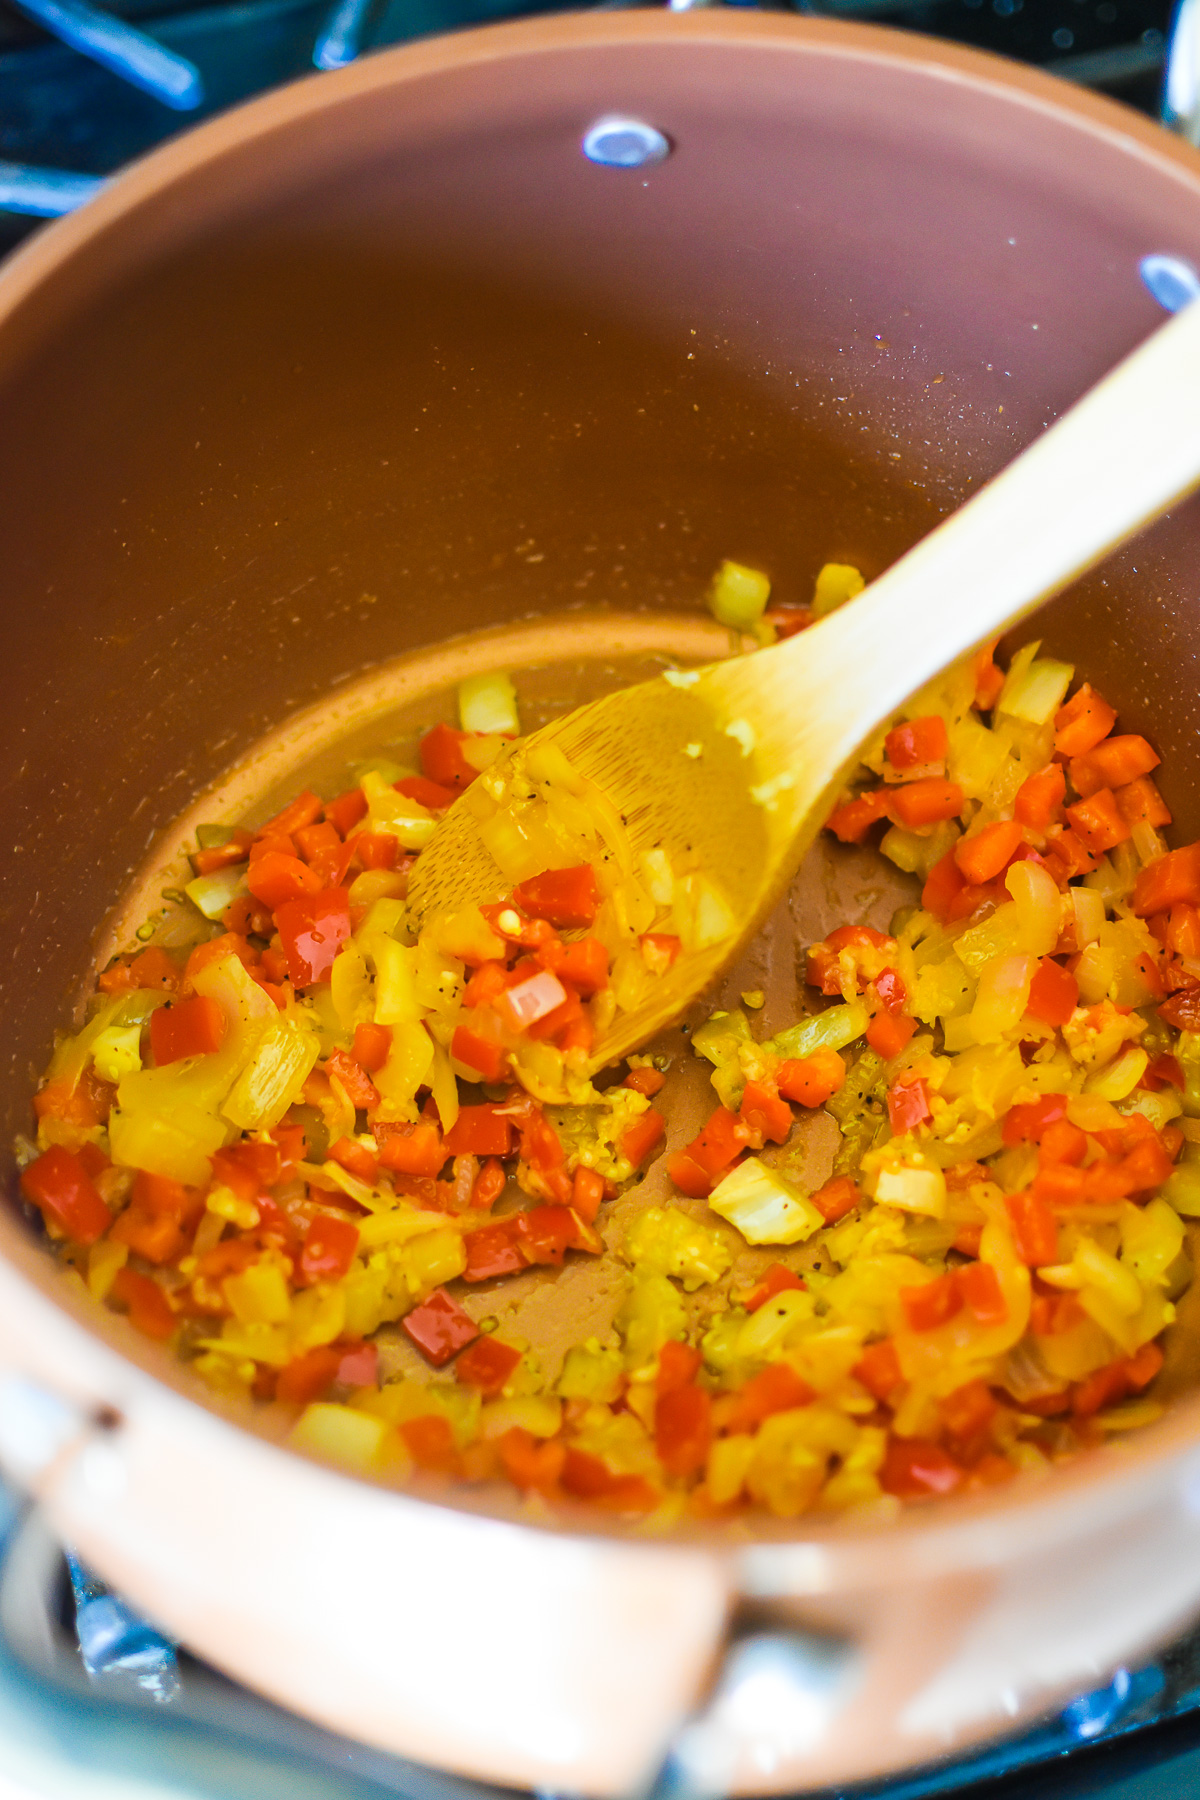 diced onion, red bell pepper, and crushed garlic sautéing in olive oil and spices in a deep copper pot.